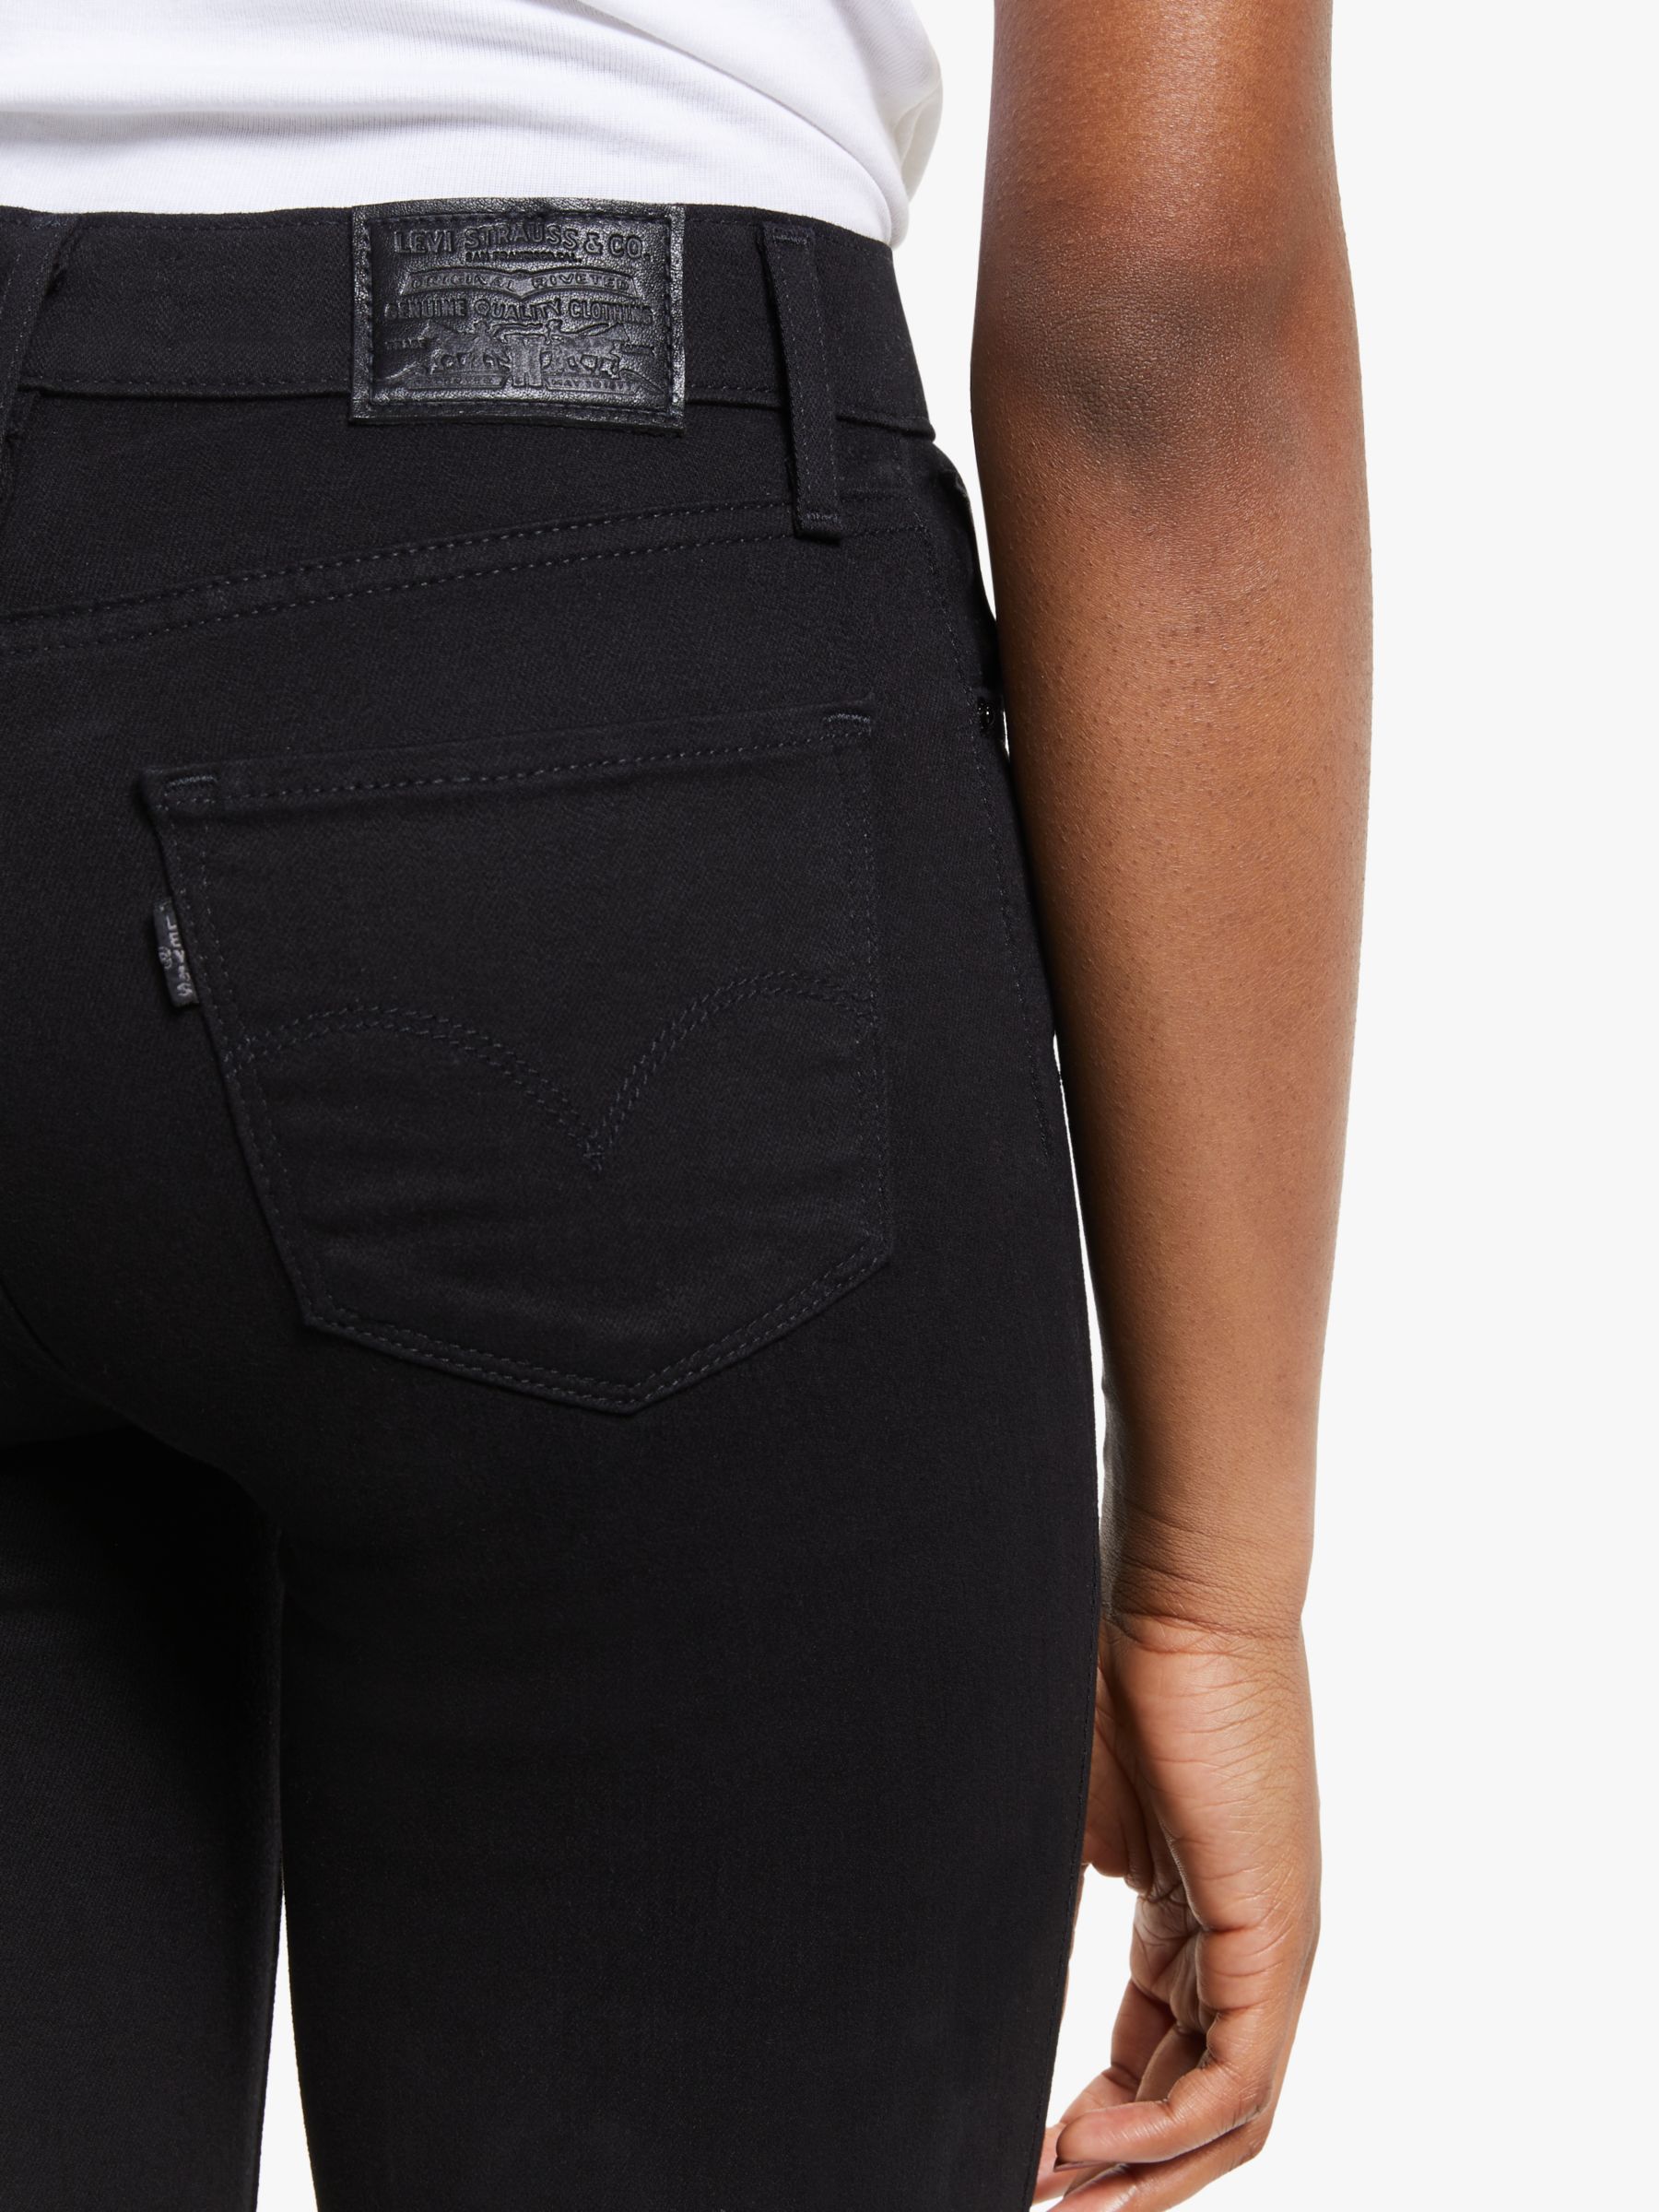 Buy Levi's 724 High Rise Straight Jeans, Black Sheep Online at johnlewis.com